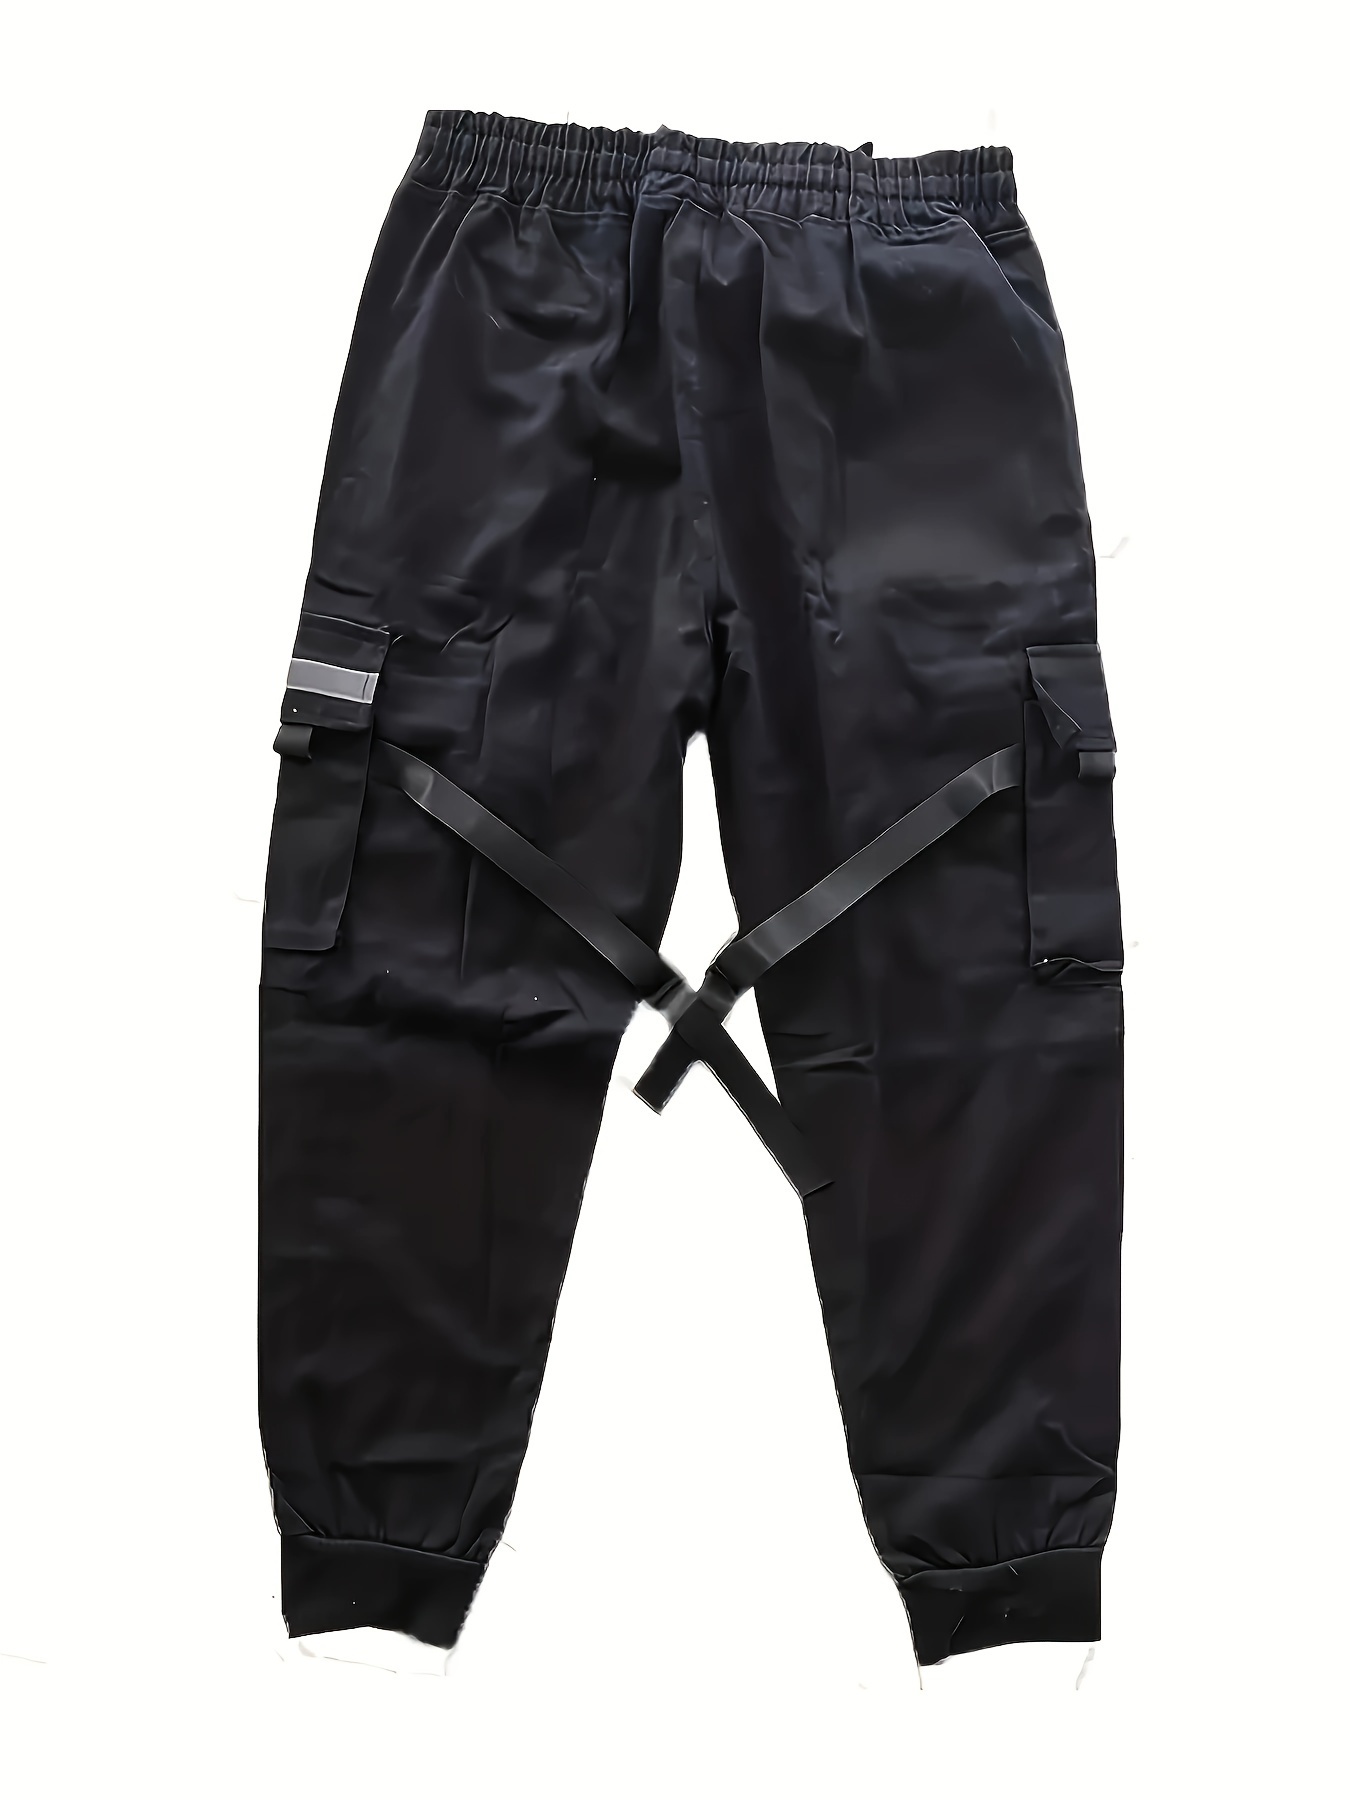 Plus Size Men's Solid Cargo Pants Cool Street Style Joggers For Big & Tall  Males, Men's Clothing